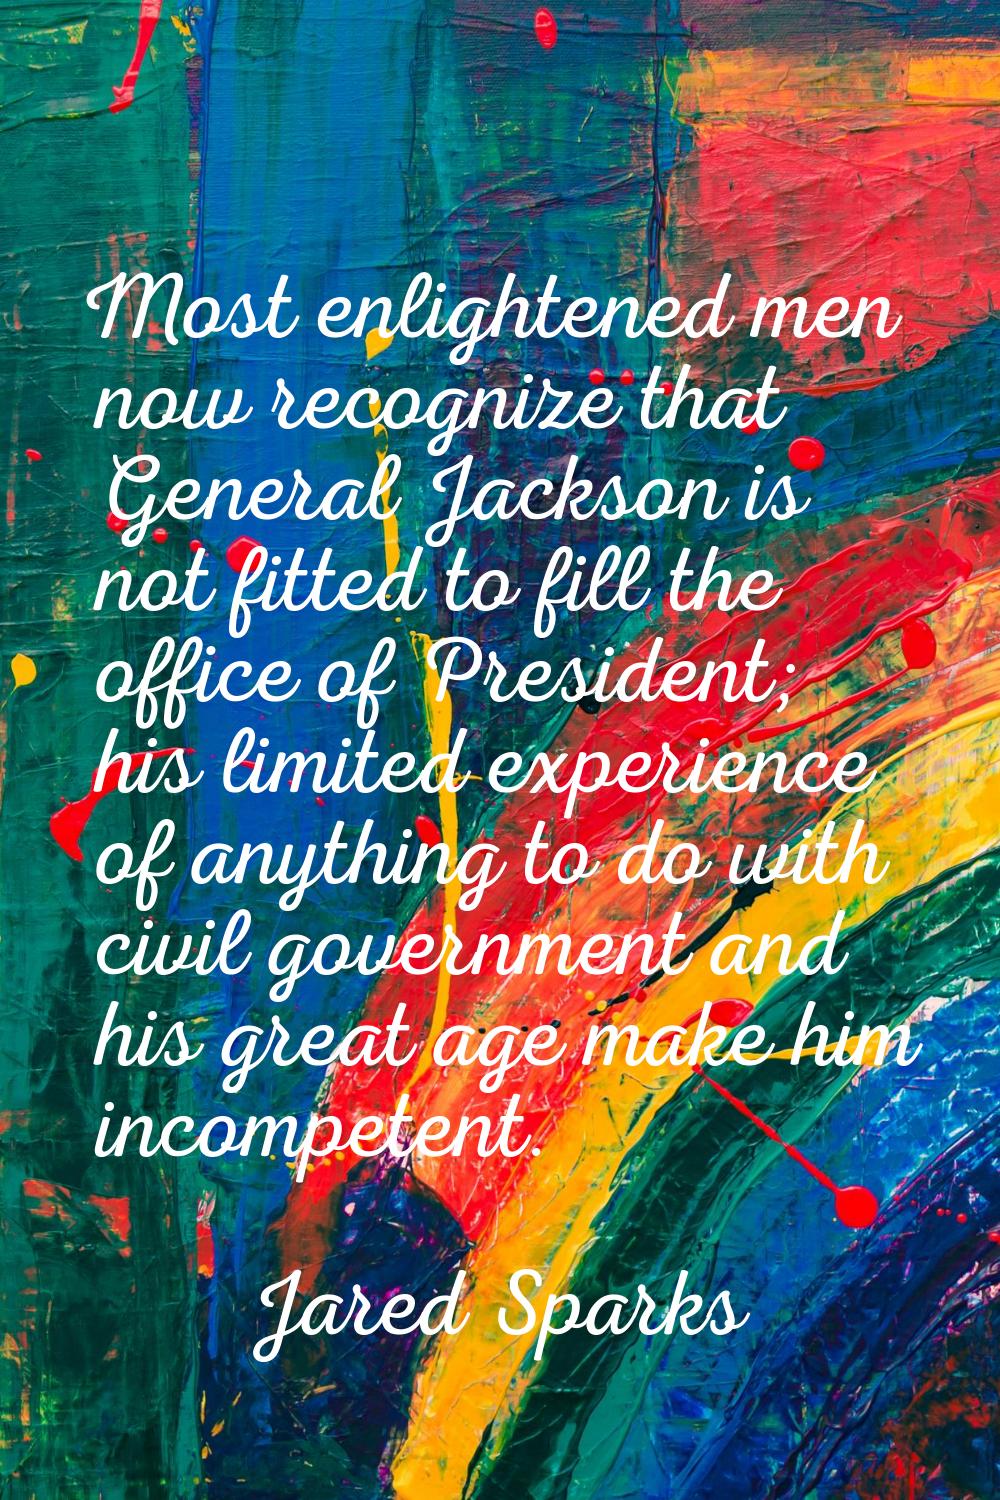 Most enlightened men now recognize that General Jackson is not fitted to fill the office of Preside